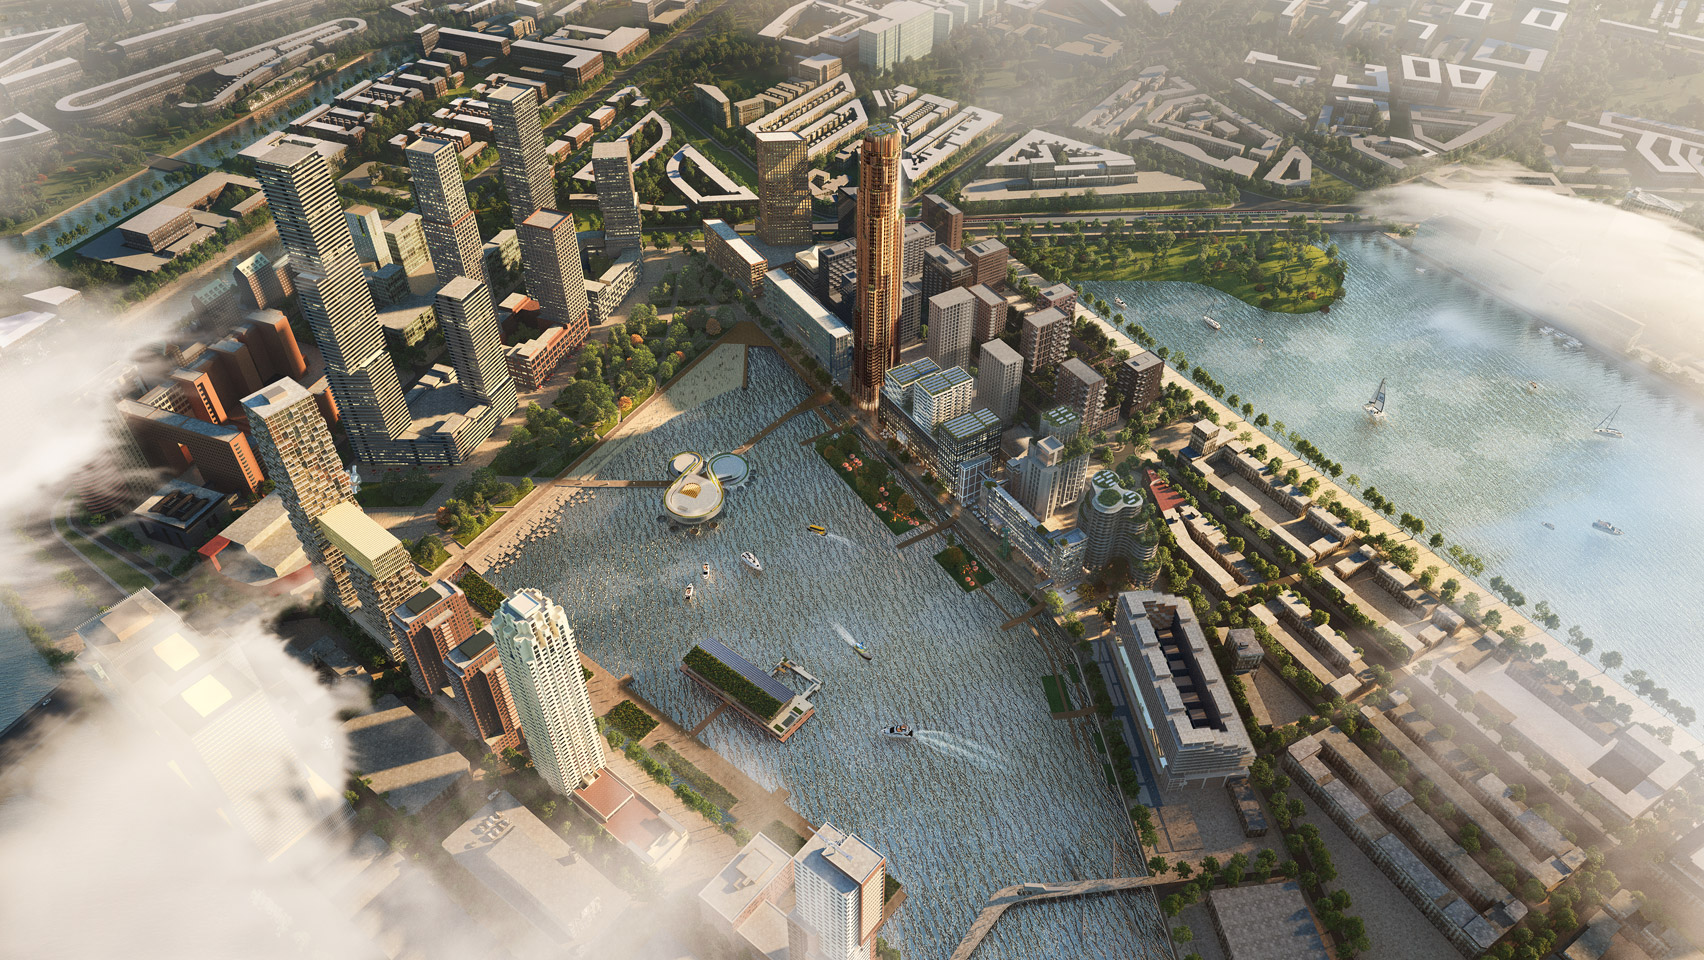 An aerial view of the Maritime Center Rotterdam by Mecanoo